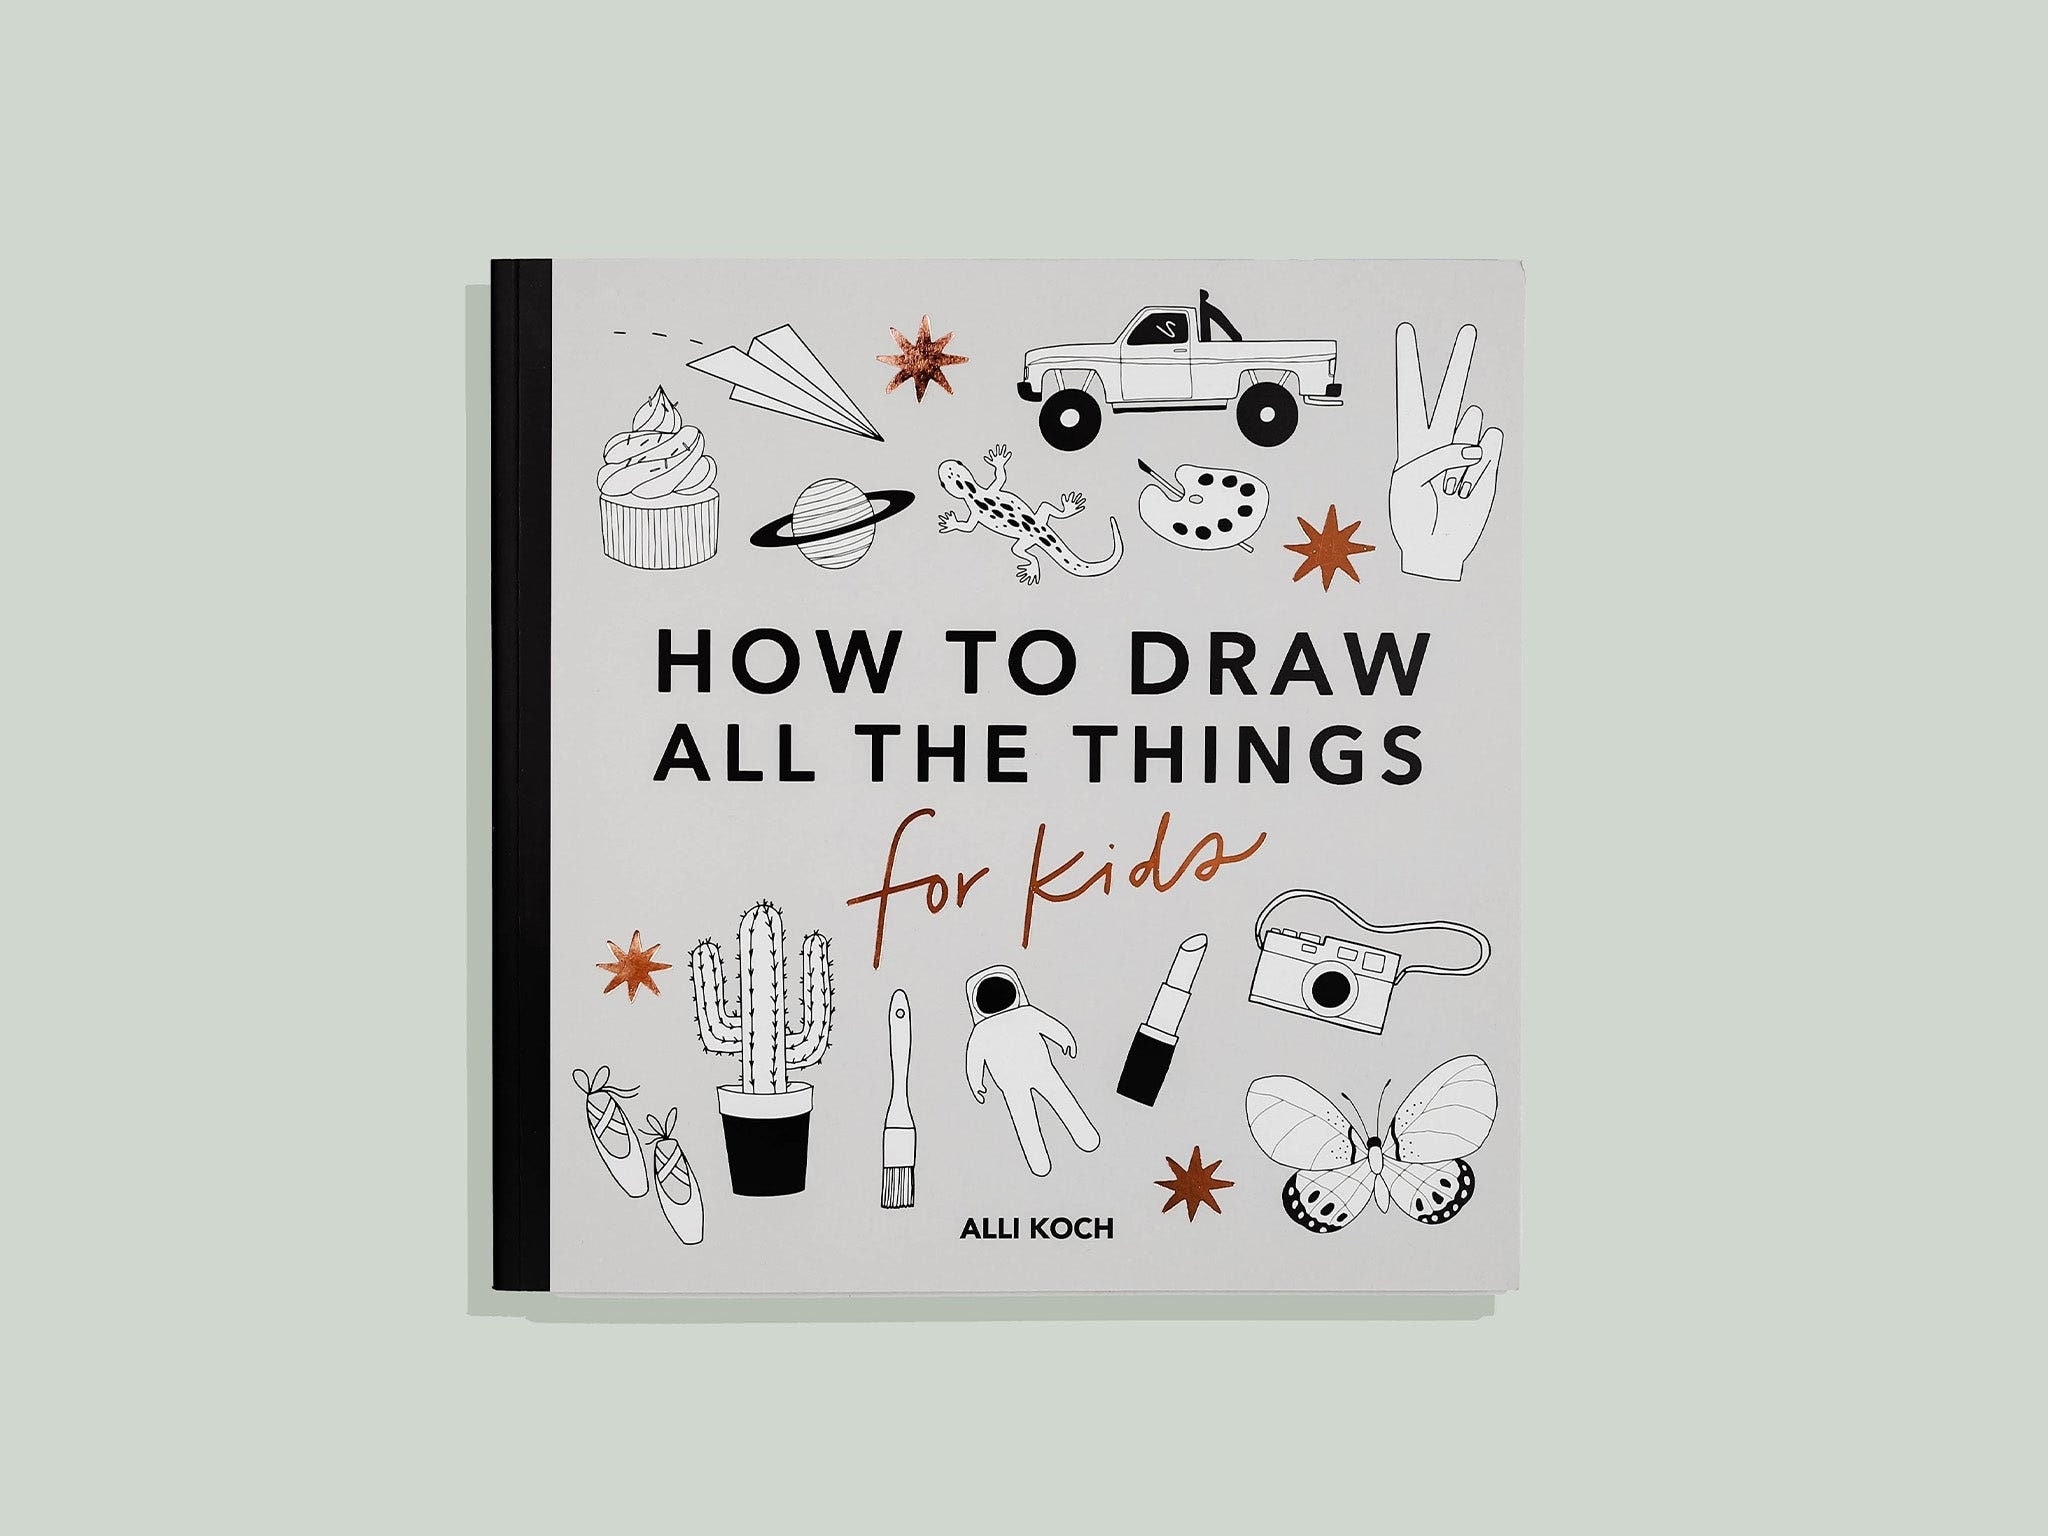 How to draw for kids ages 8-12: A Simple Step-by-Step Guide to Drawing Cute  Animals for Kids to Learn to Draw (Paperback)